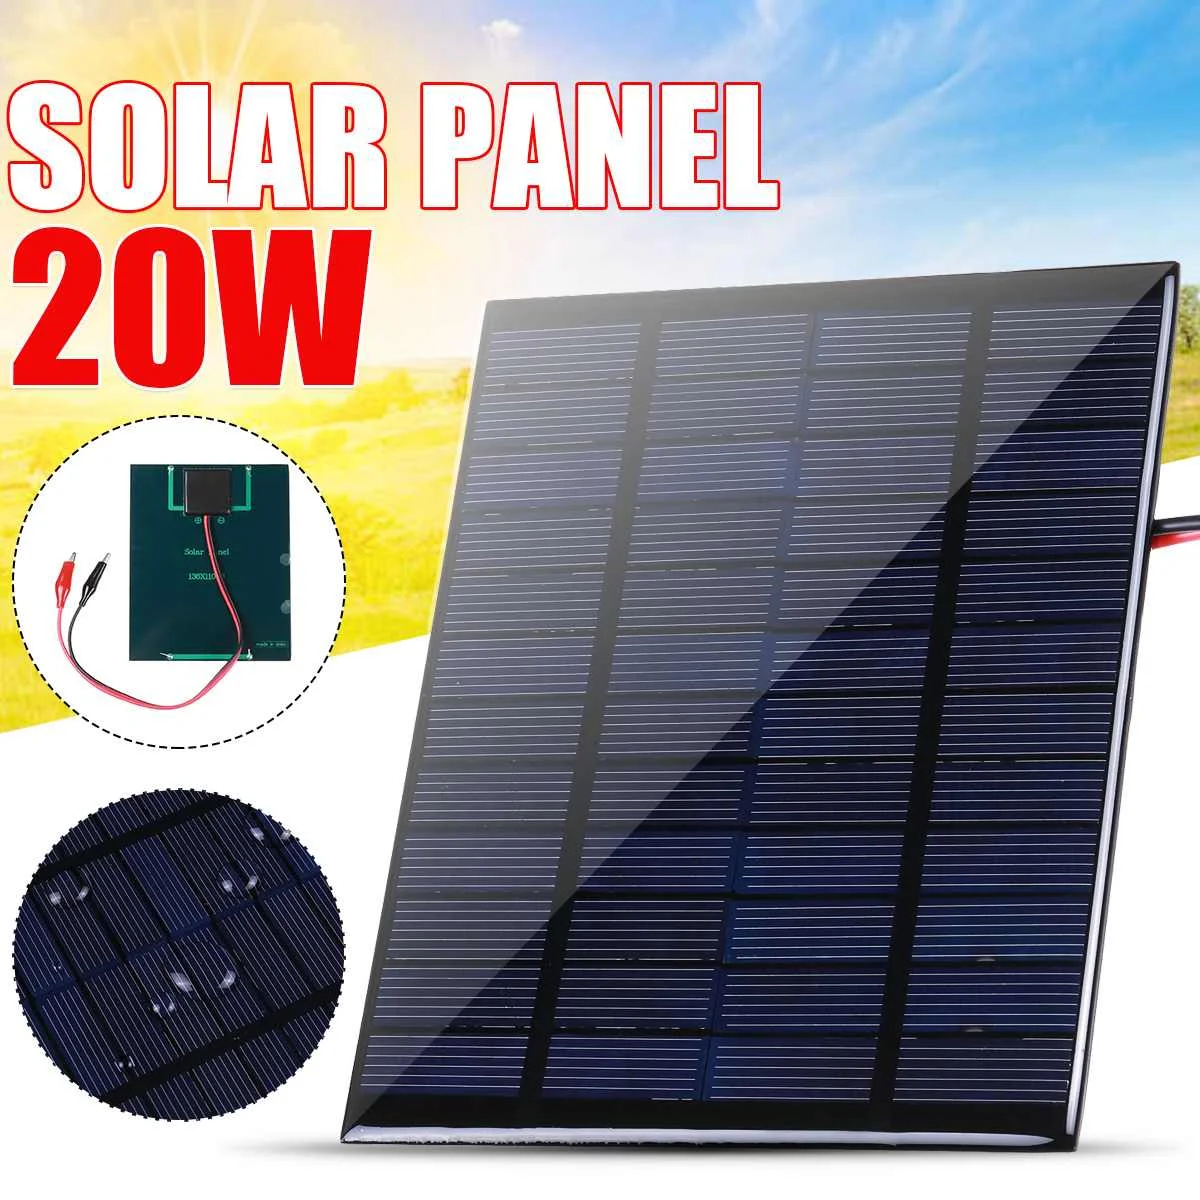 20W Solar Panel 12V Solar Cell Solar Panel For Lamp Fan Pump For Outdoor Camping Garden Charger Outdoor Battery Supply